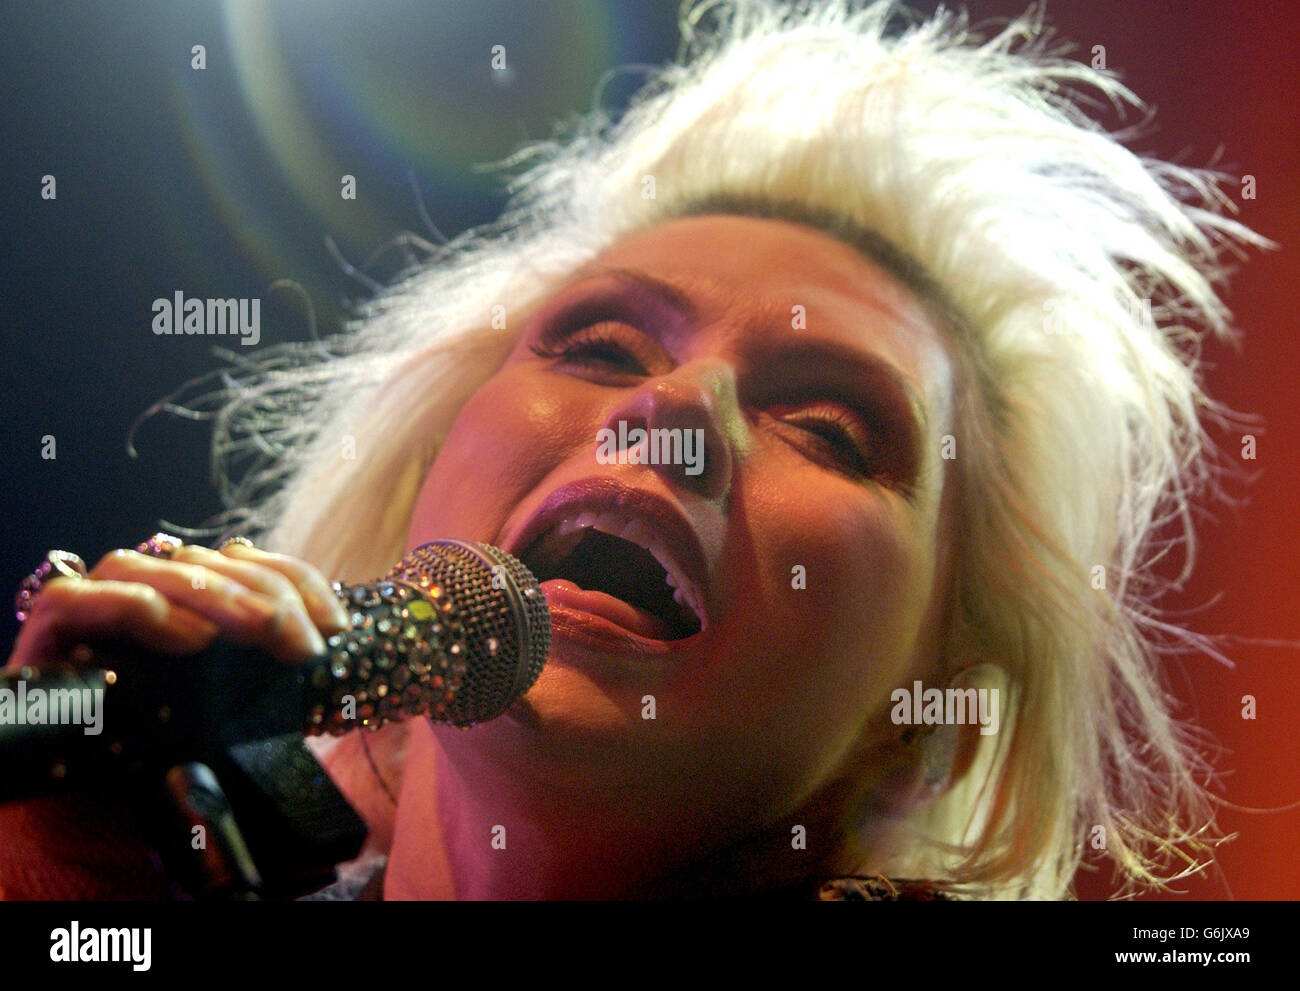 Singer Debbie Harry from Blondie performs live in concert at Shepherds Bush Empire in west London. The band are promoting their Greatest Hits album. Stock Photo